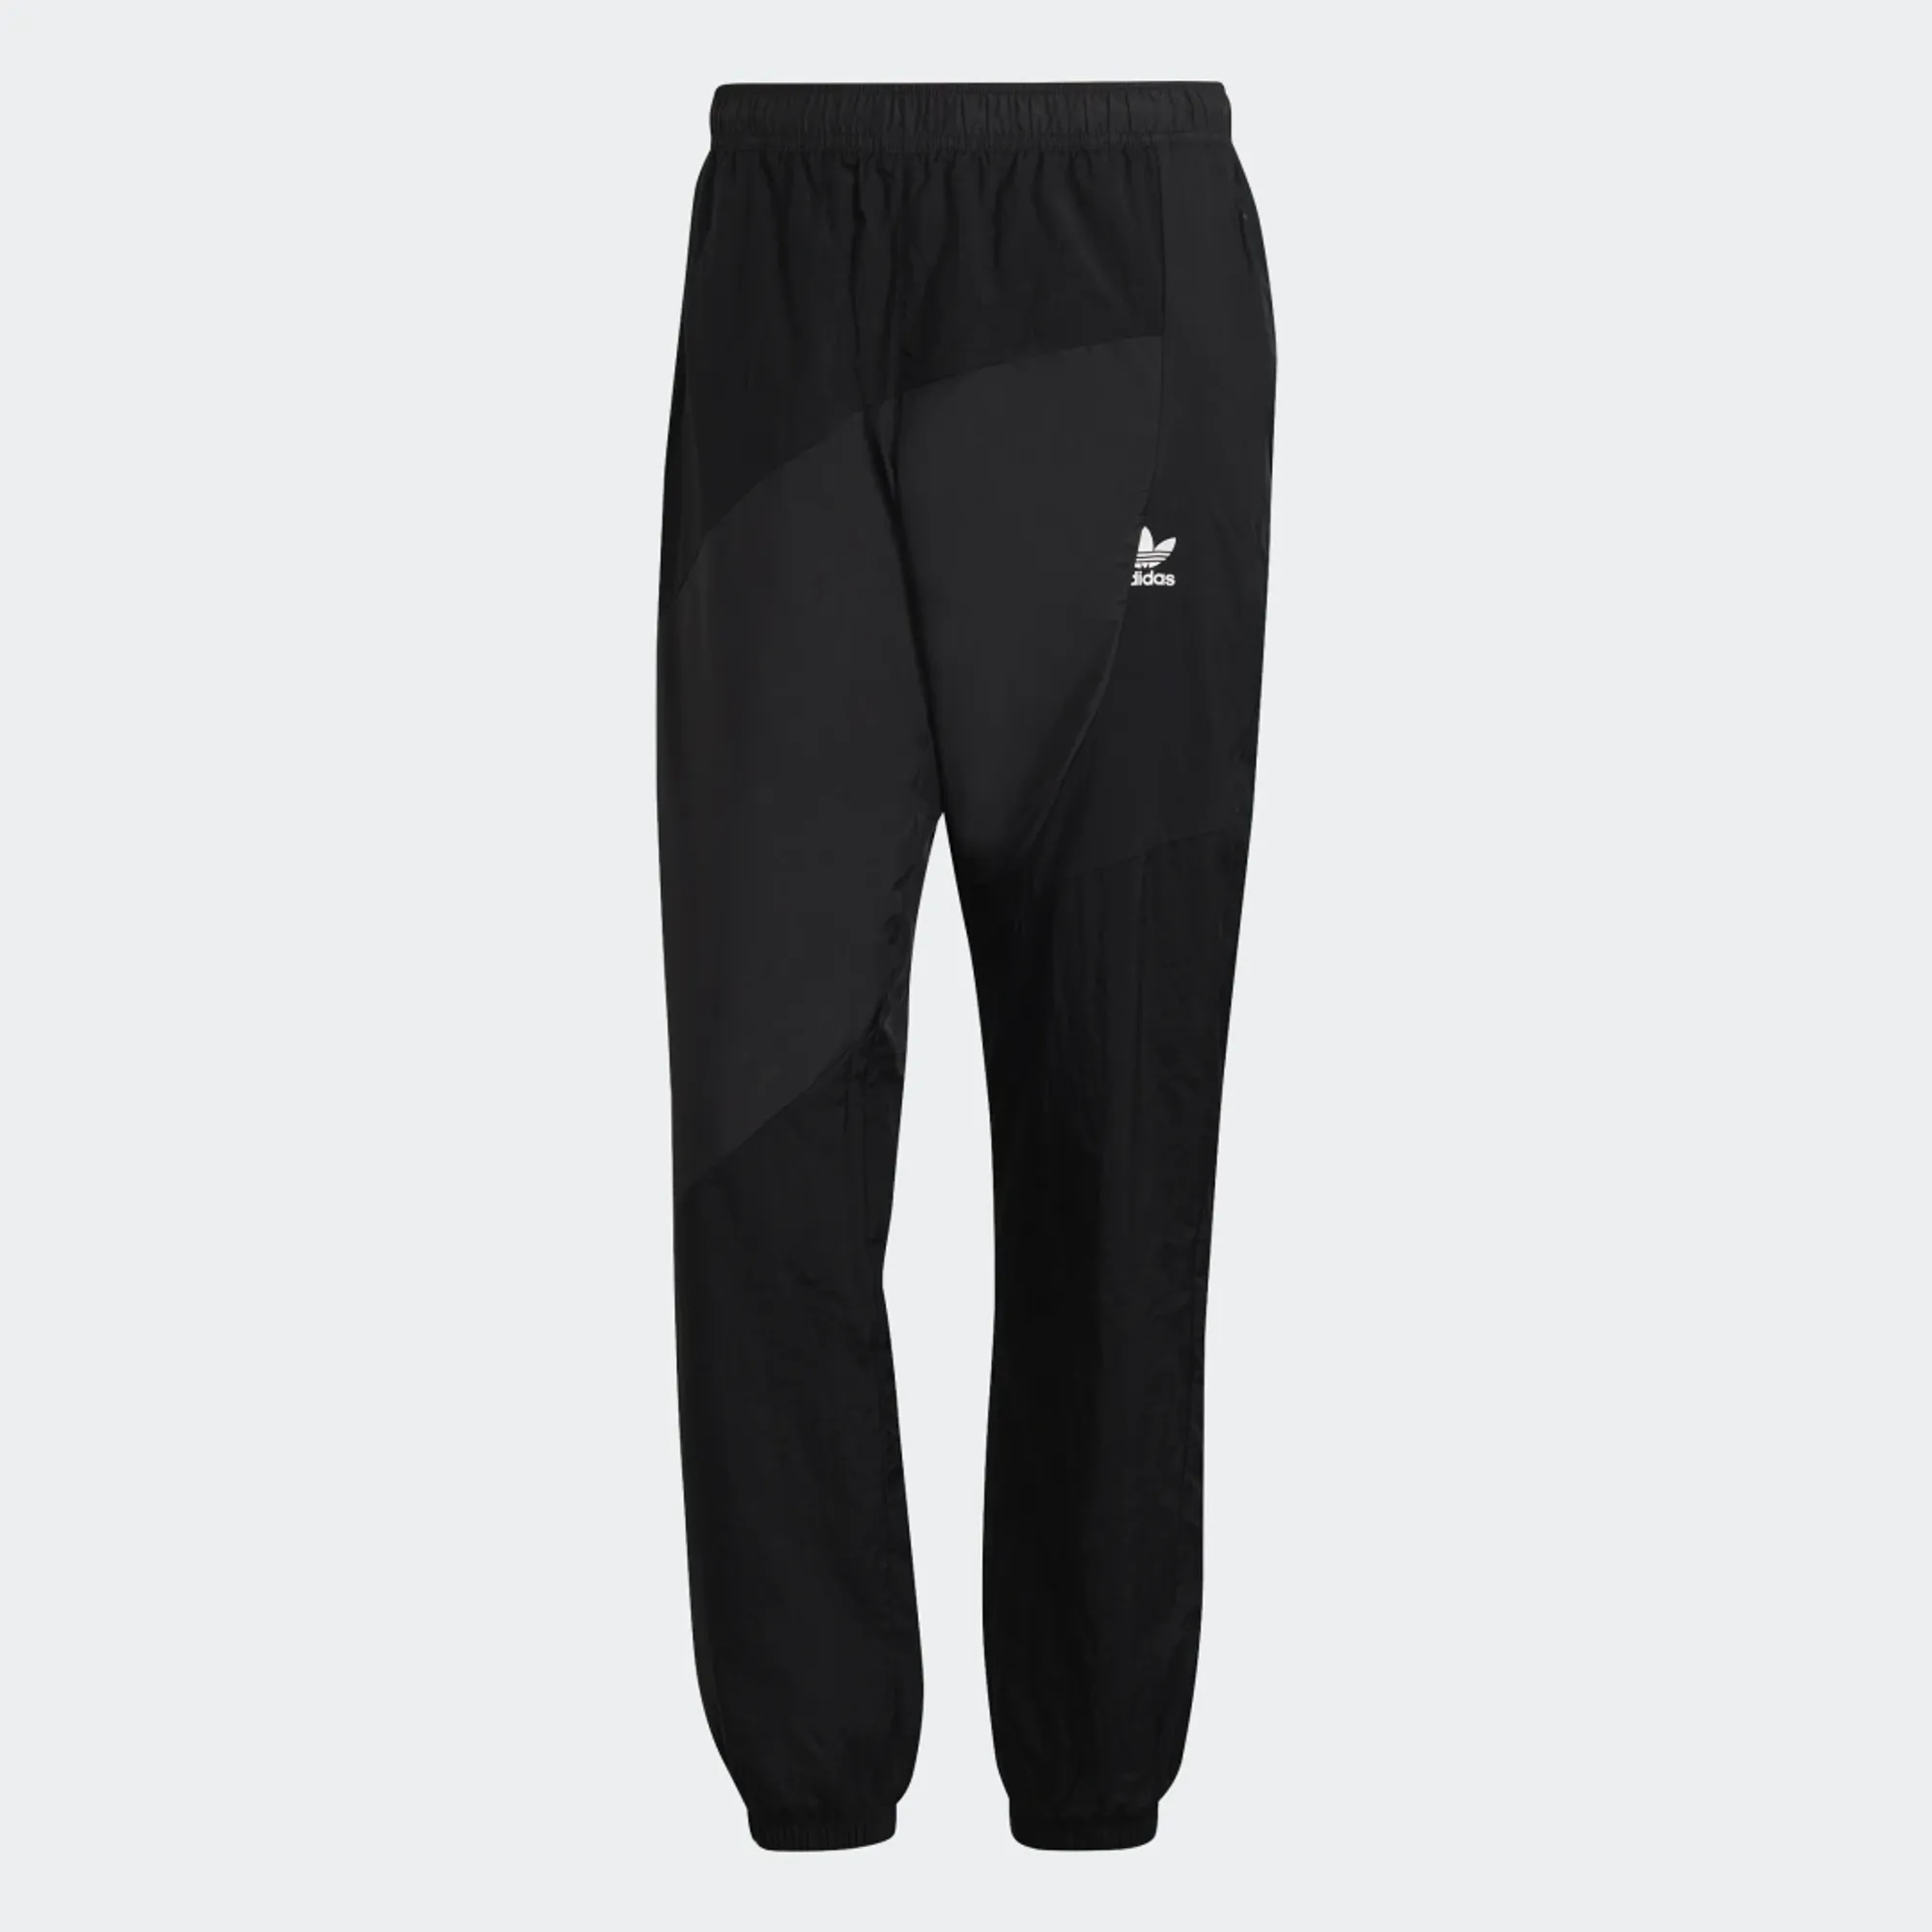 Solid men Black and Grey Color combo track pants for men | men track pants  | track pants (Small) : Amazon.in: Clothing & Accessories